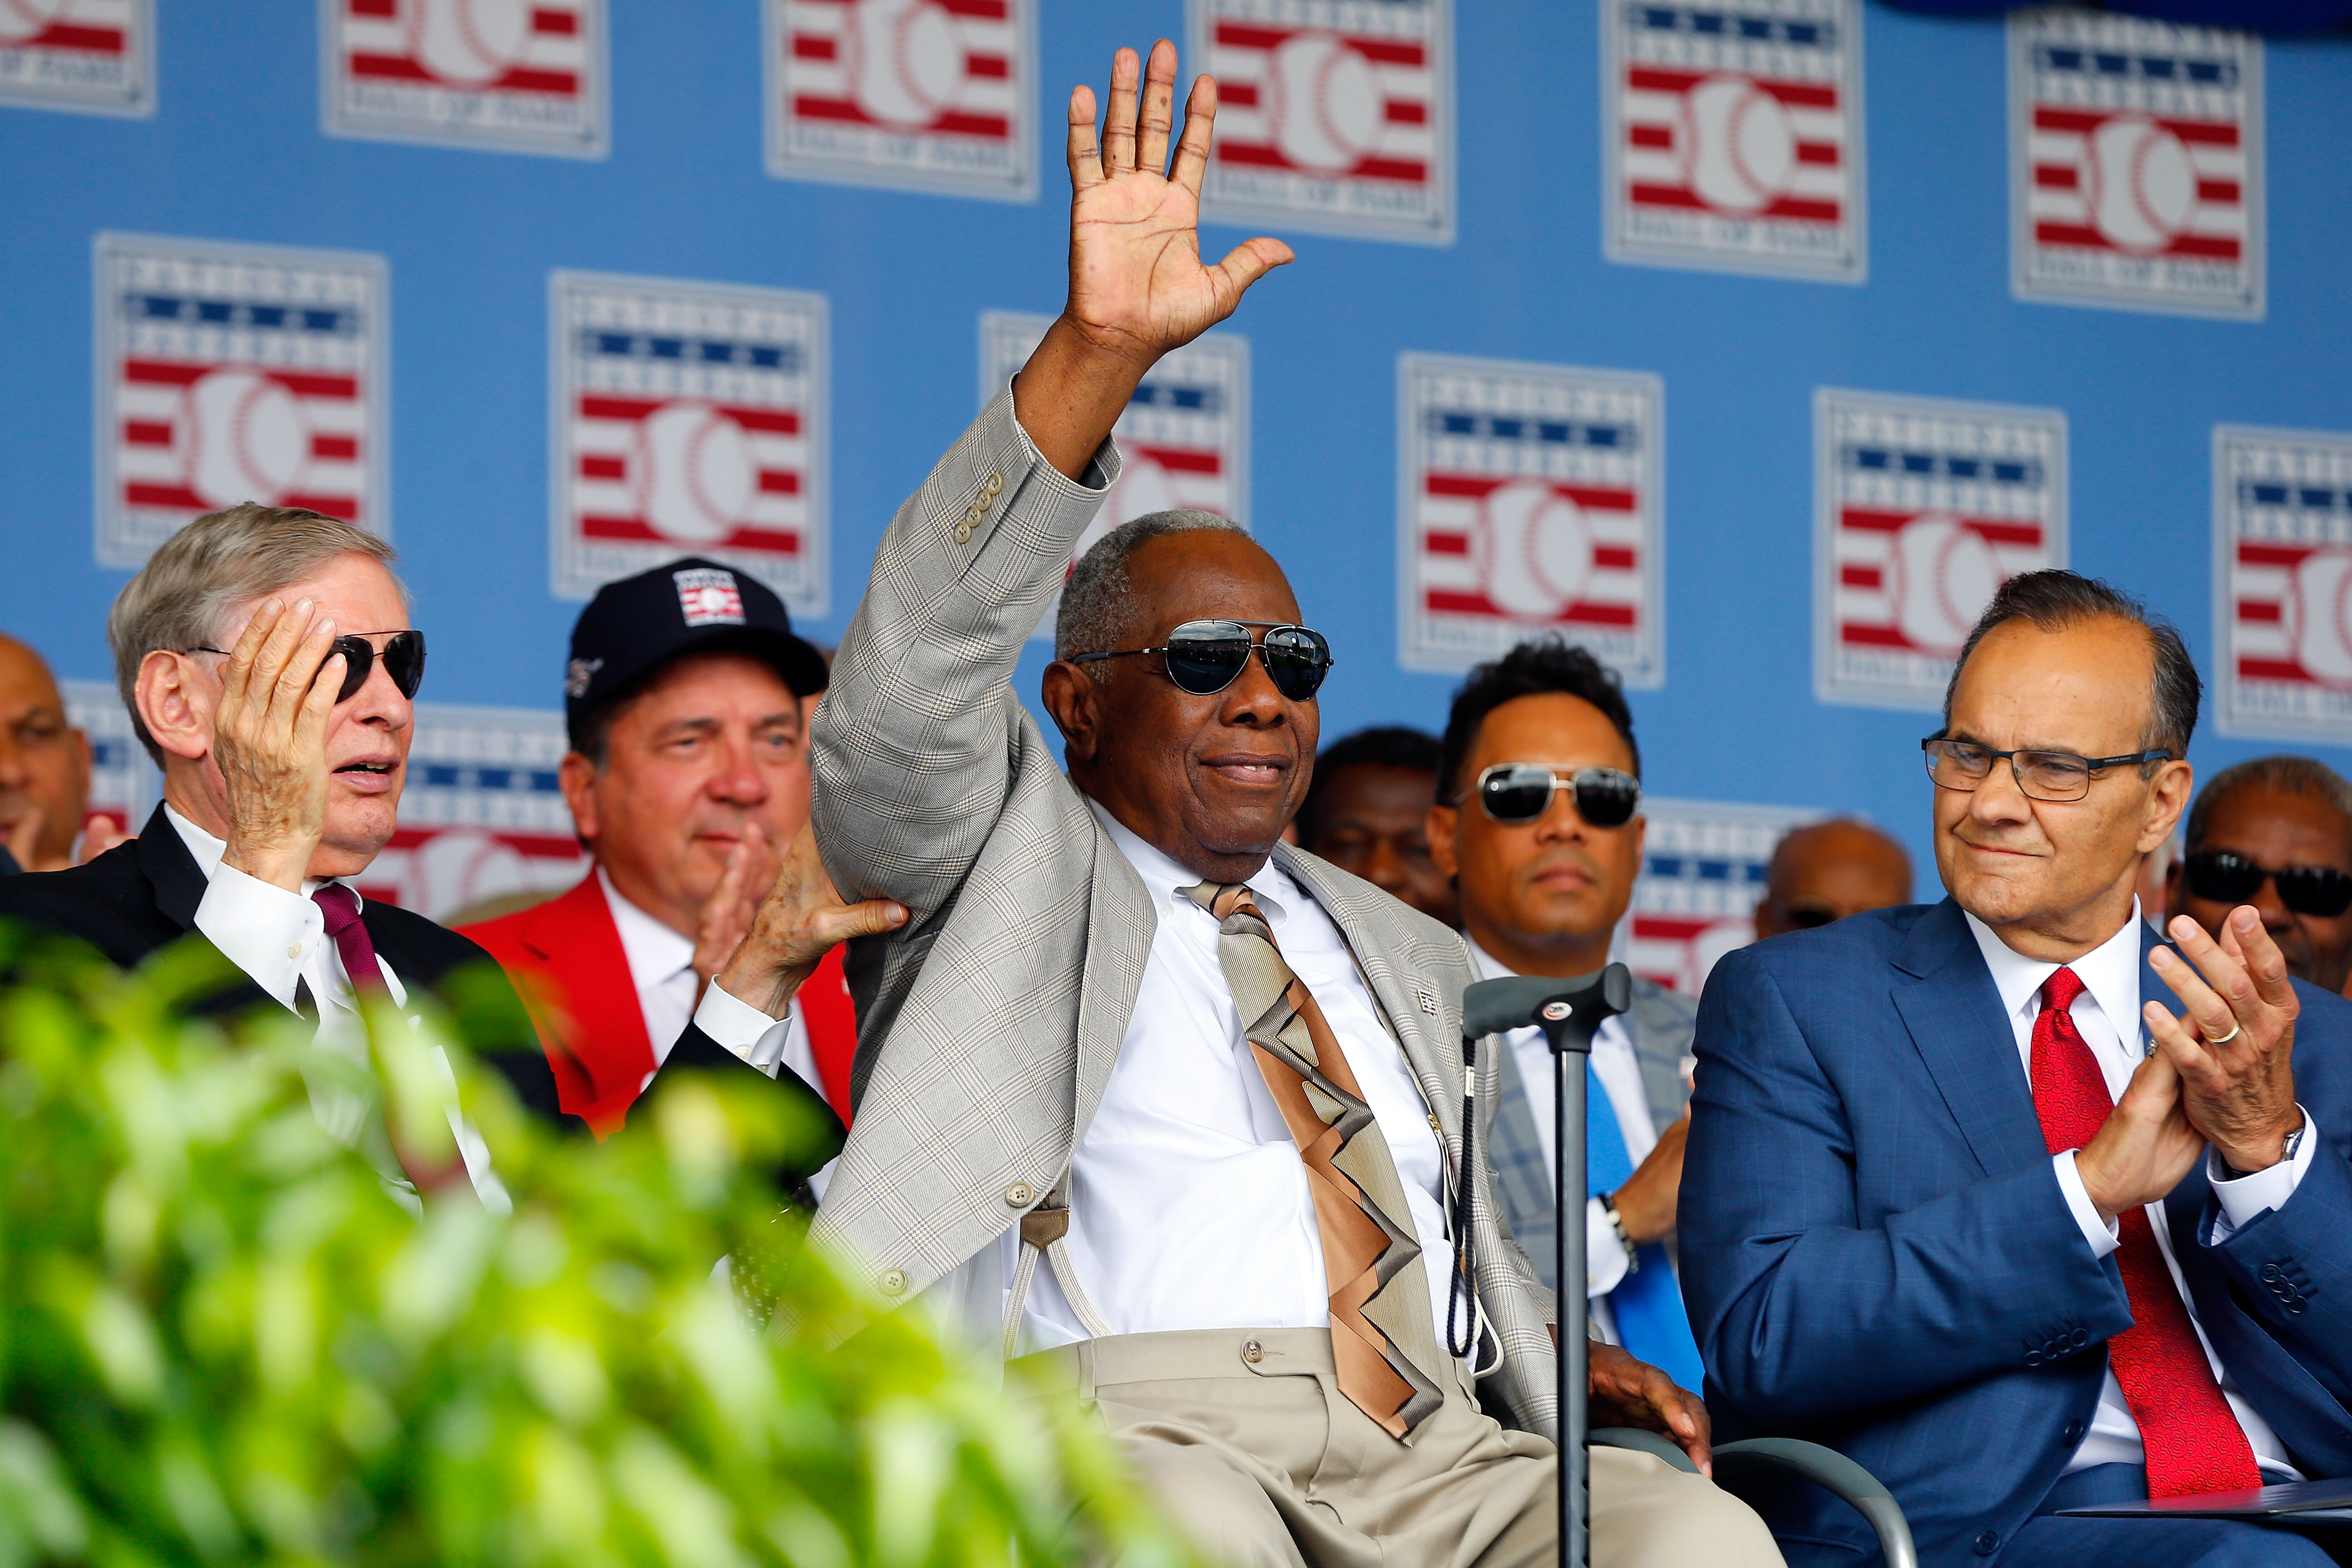 Trading All-Time Home Run King Hank Aaron ‘Wasn’t That Big of a Deal’